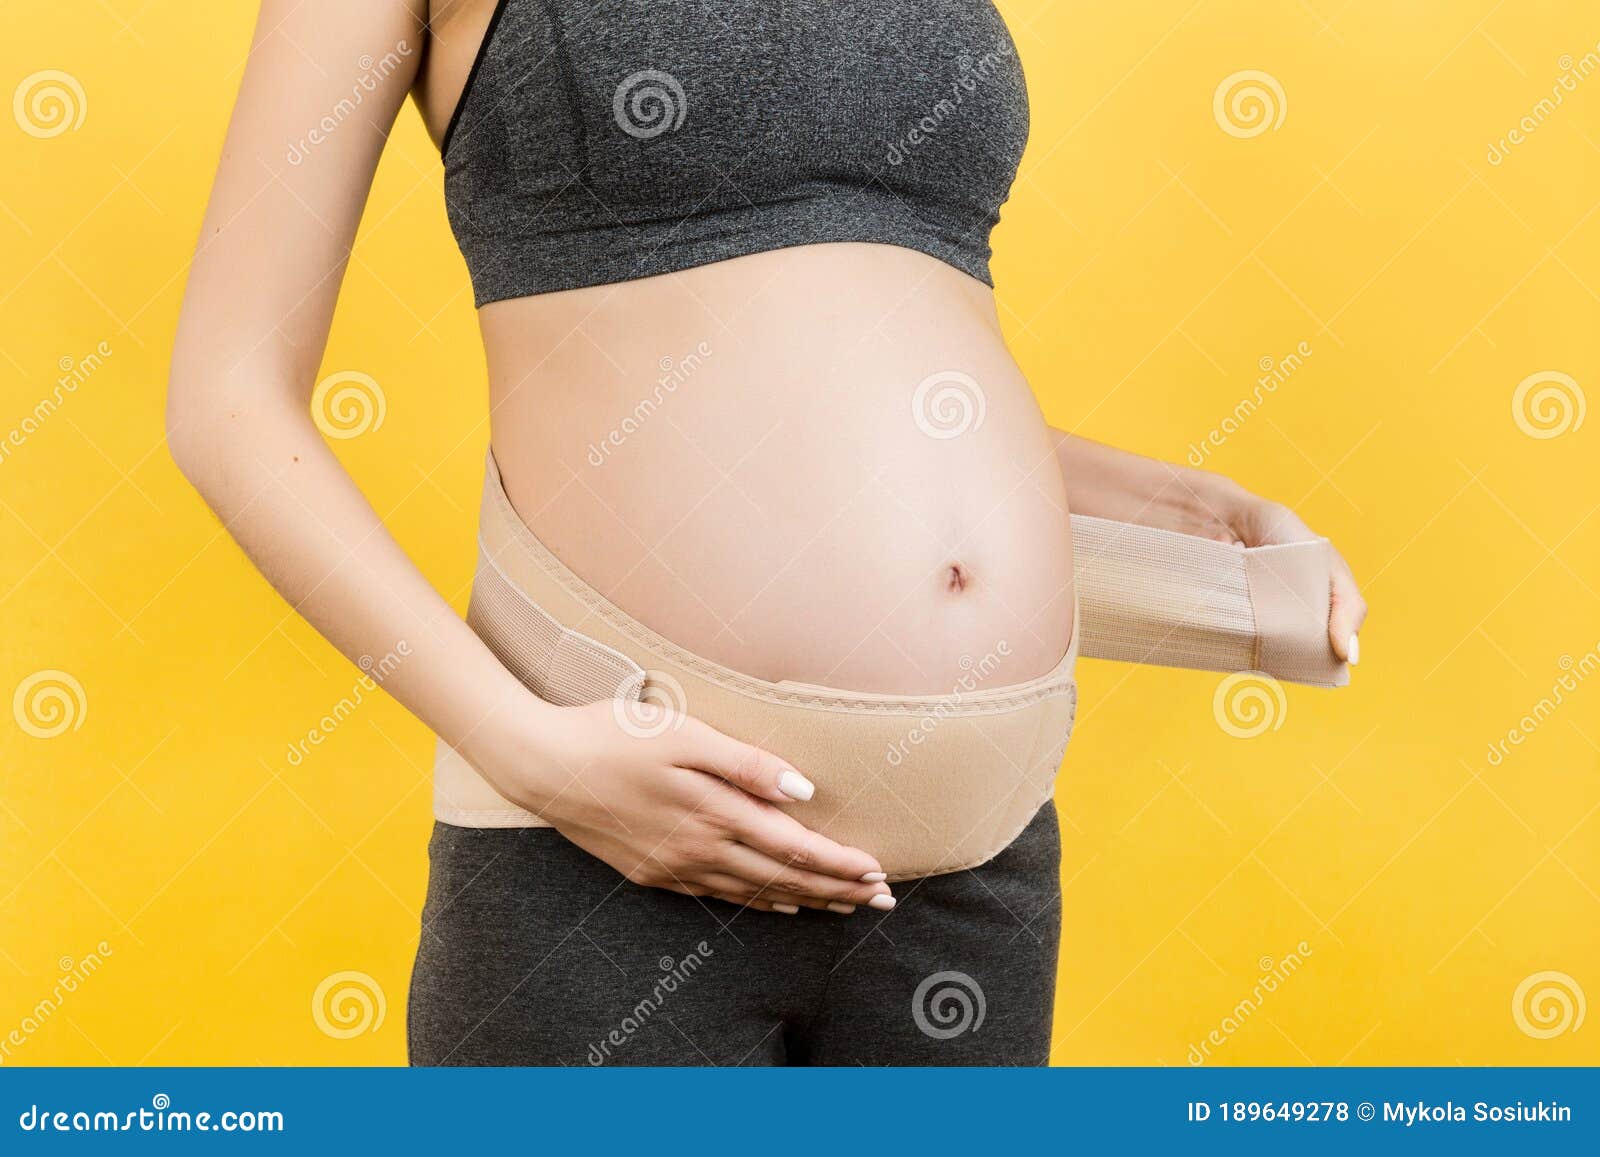 https://thumbs.dreamstime.com/z/close-up-pregnant-woman-dressing-pregnancy-corset-third-trimester-yellow-background-copy-space-orthopedic-close-189649278.jpg